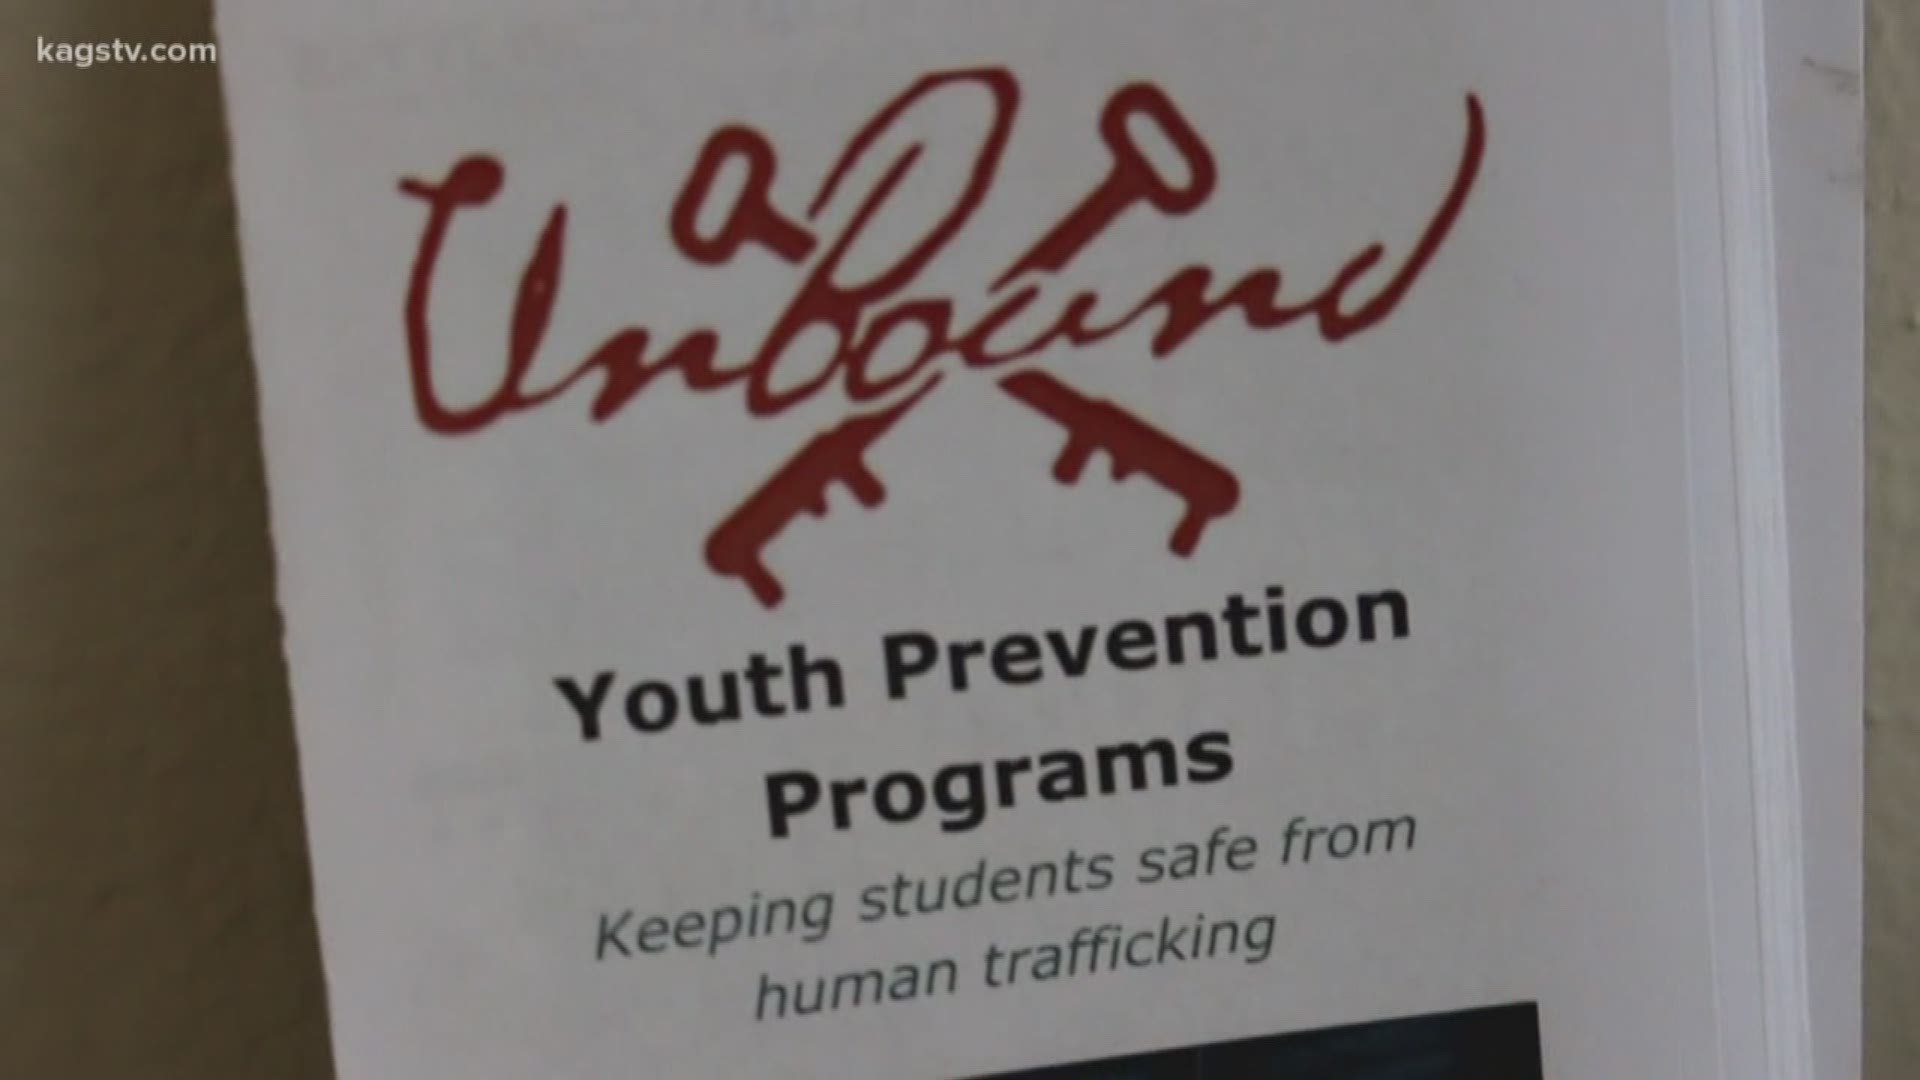 Texas has reported 455 human trafficking cases since June, according to the National Human Trafficking Hotline.